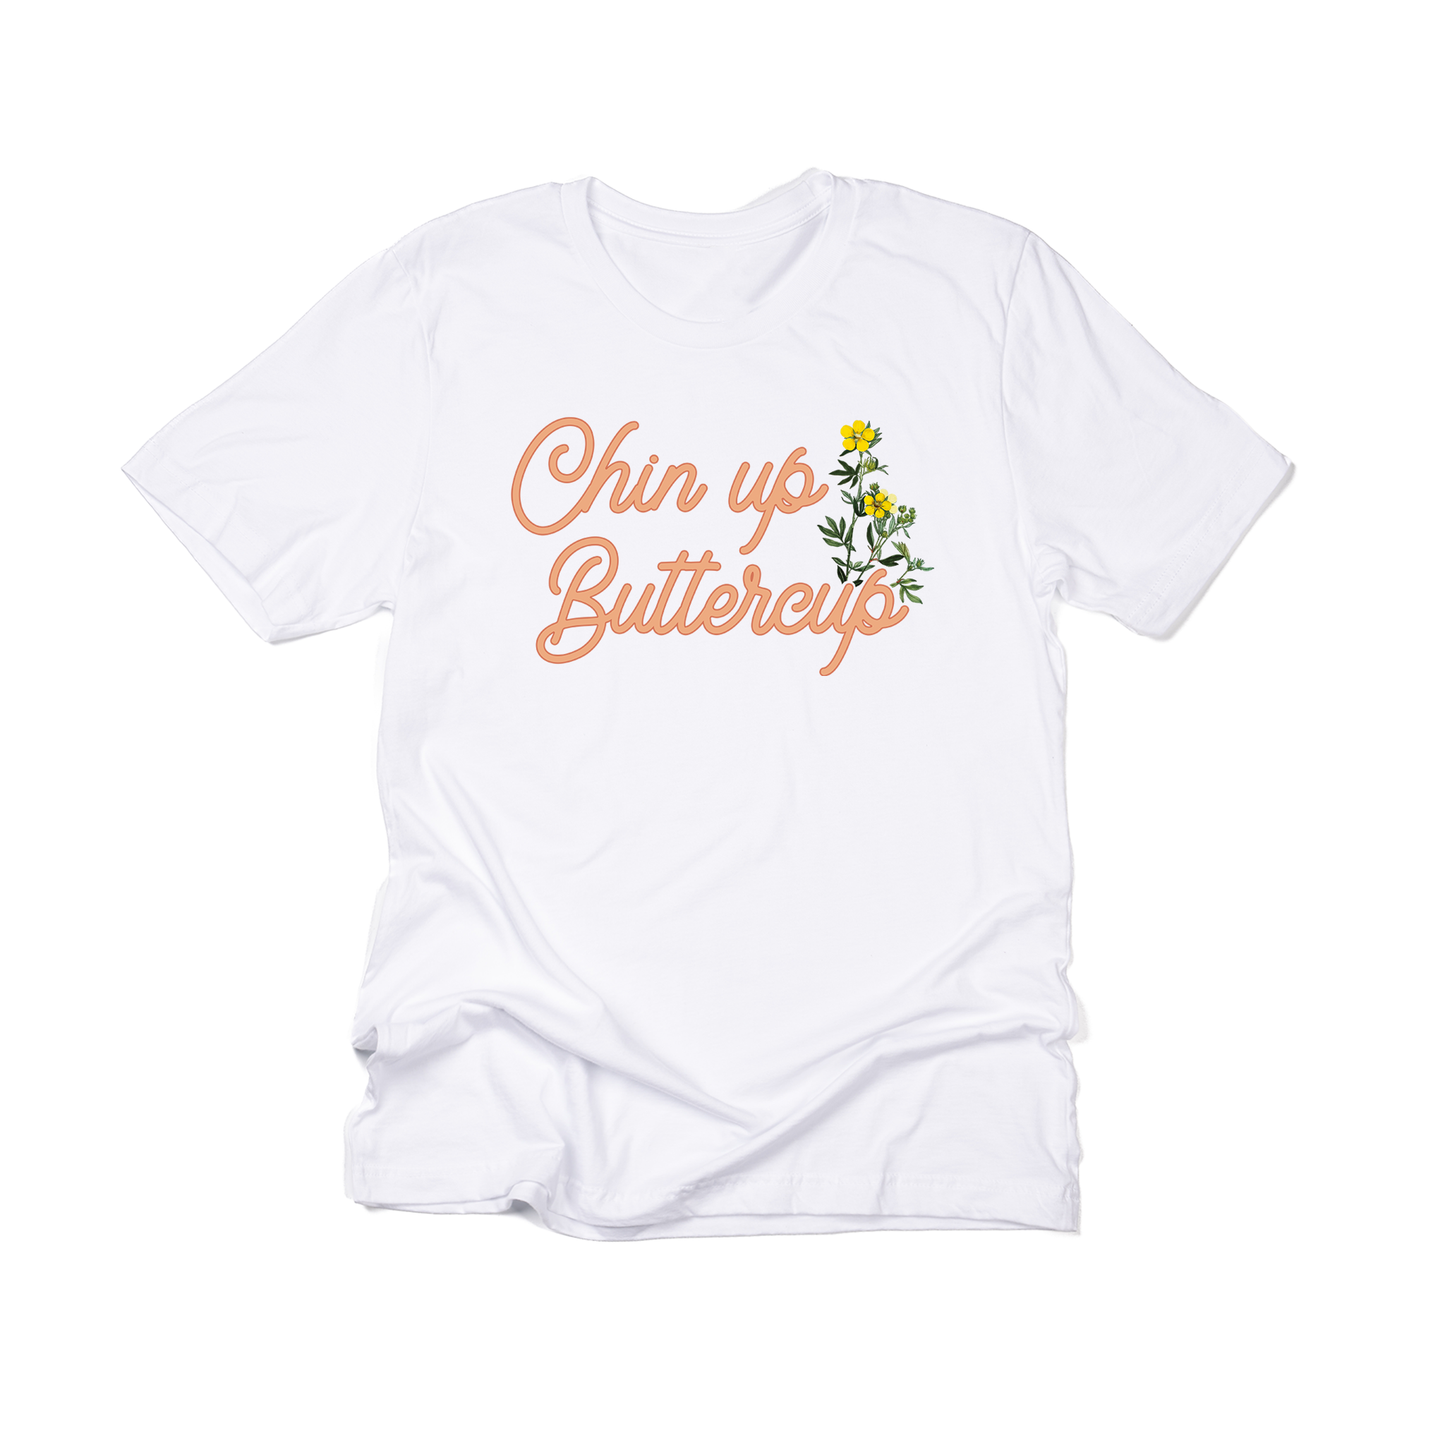 Chin Up Buttercup - Tee (White)